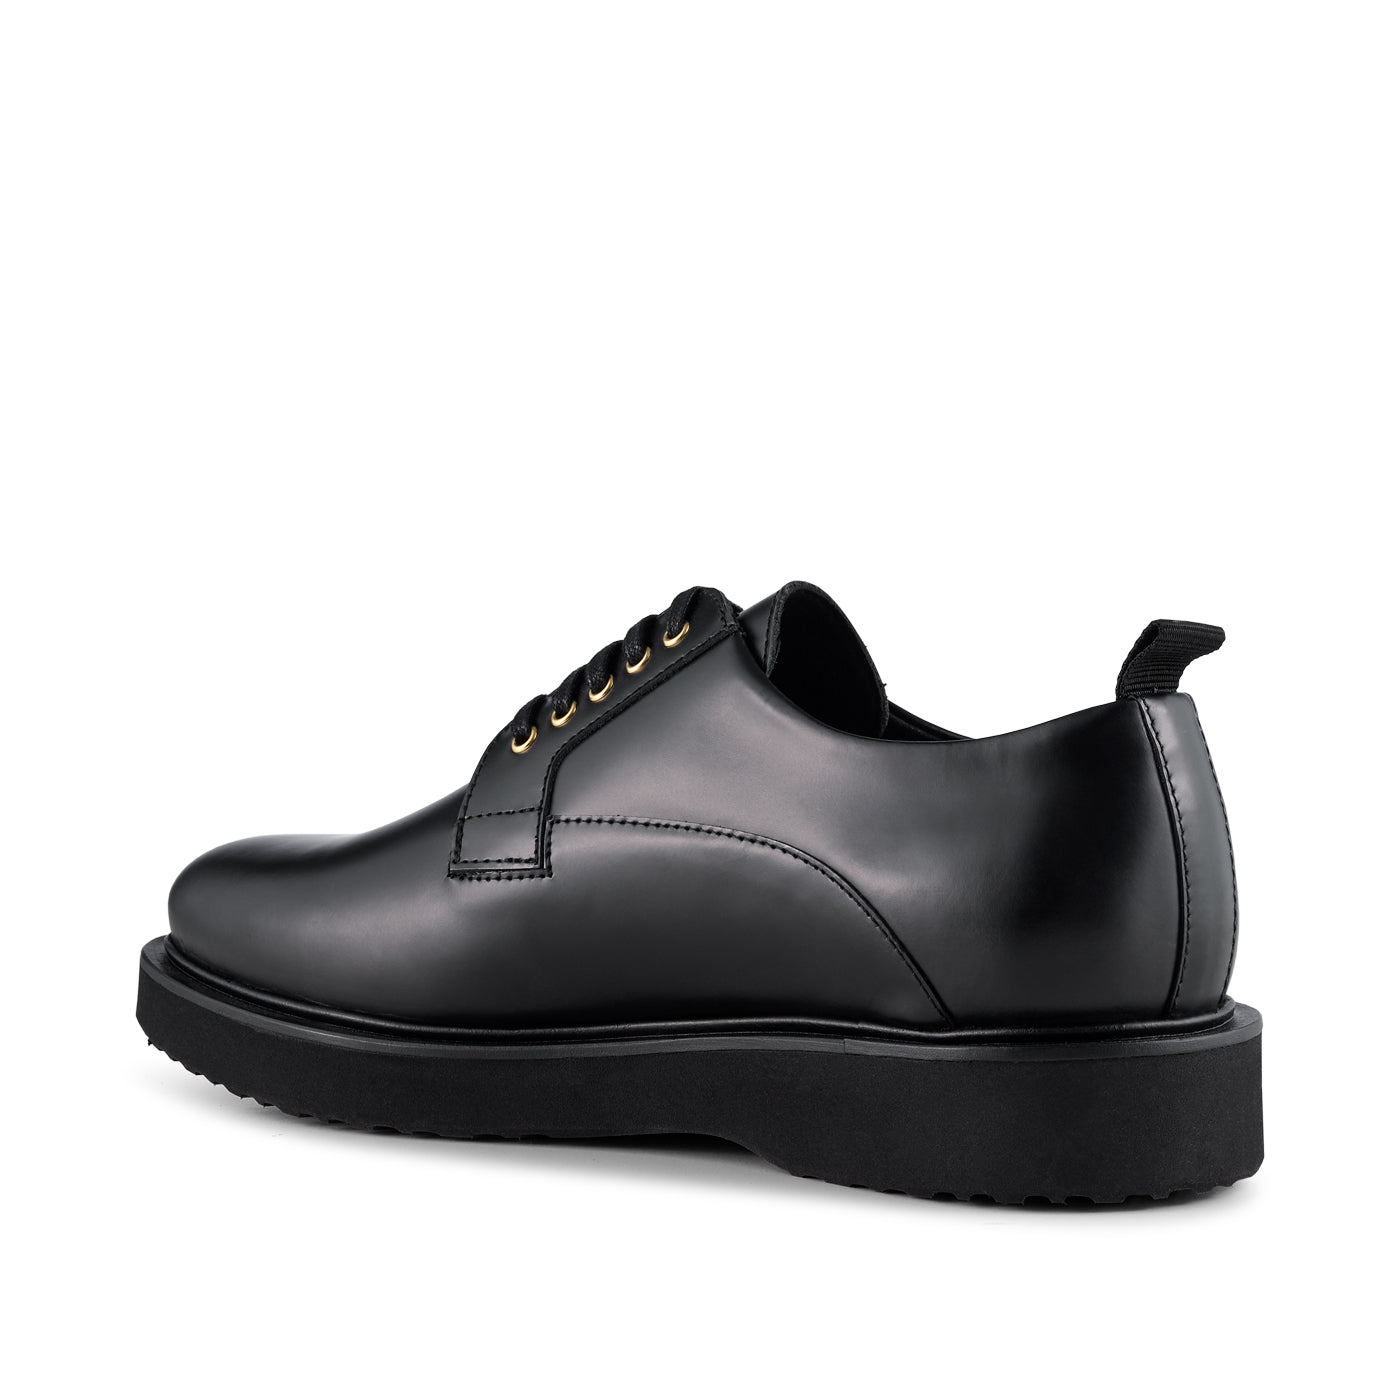 SHOE THE BEAR MENS Cosmos shoe leather Shoes 110 BLACK